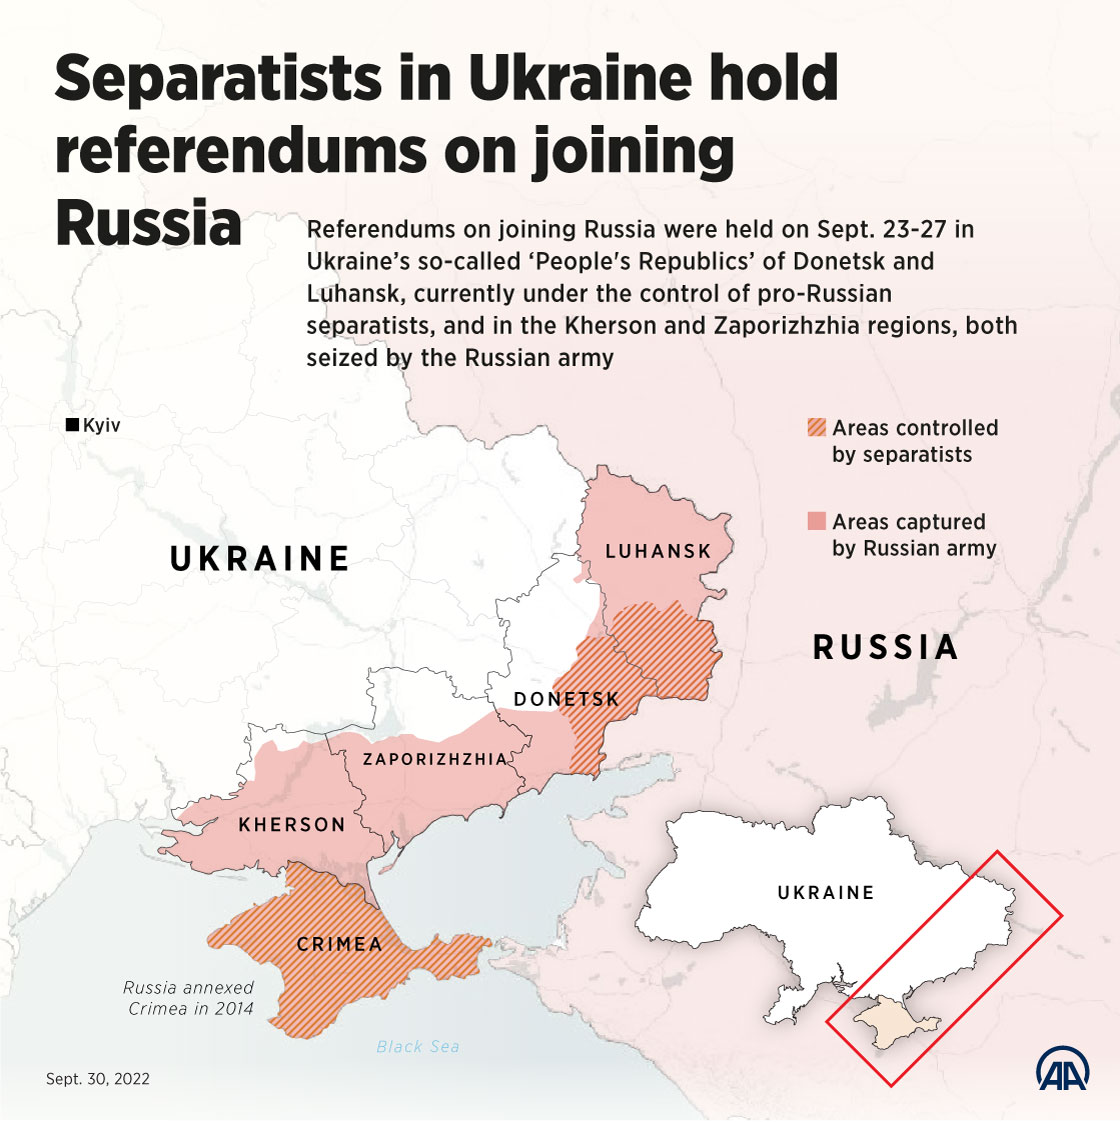 Separatists in Ukraine hold referendum on joining Russia